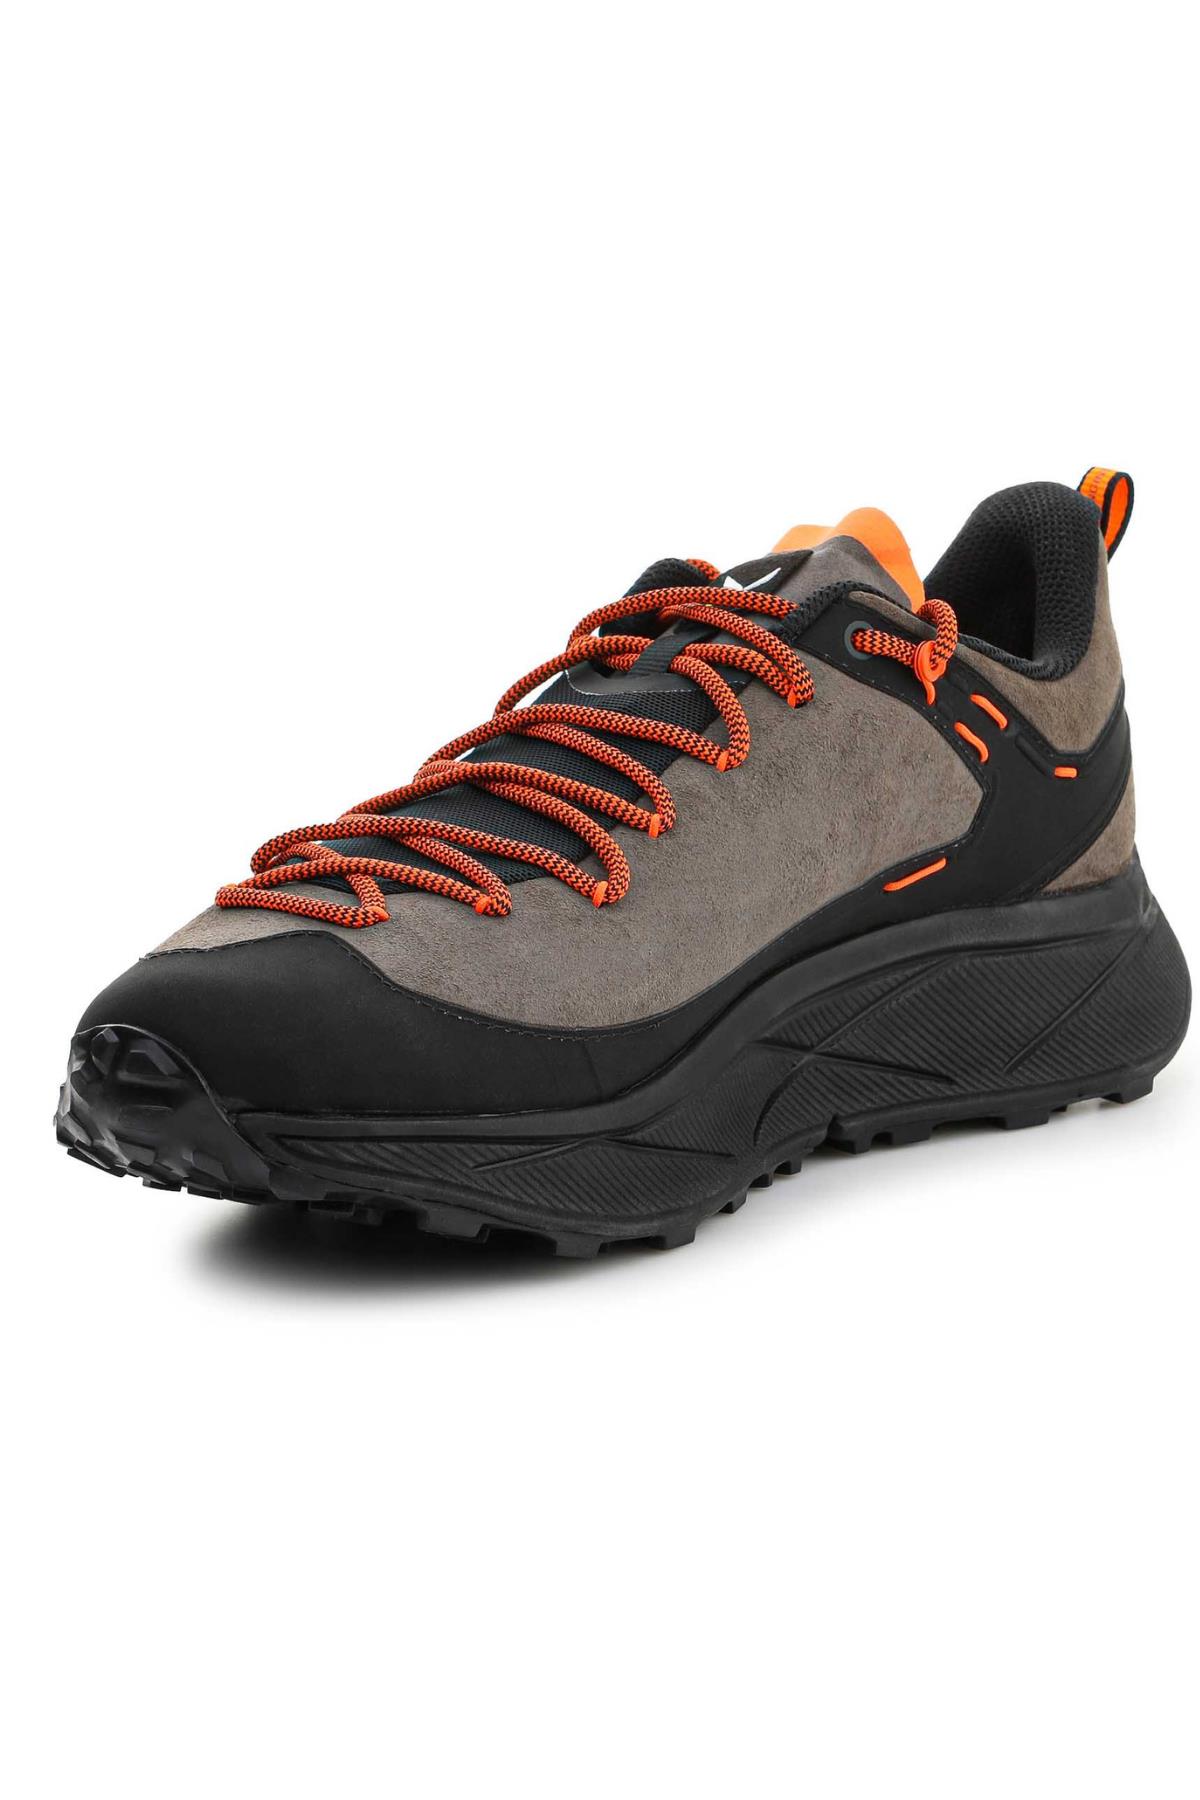 Buy East Pacific Trade Sneakers  Sports Shoes for Men Online  FASHIOLAin